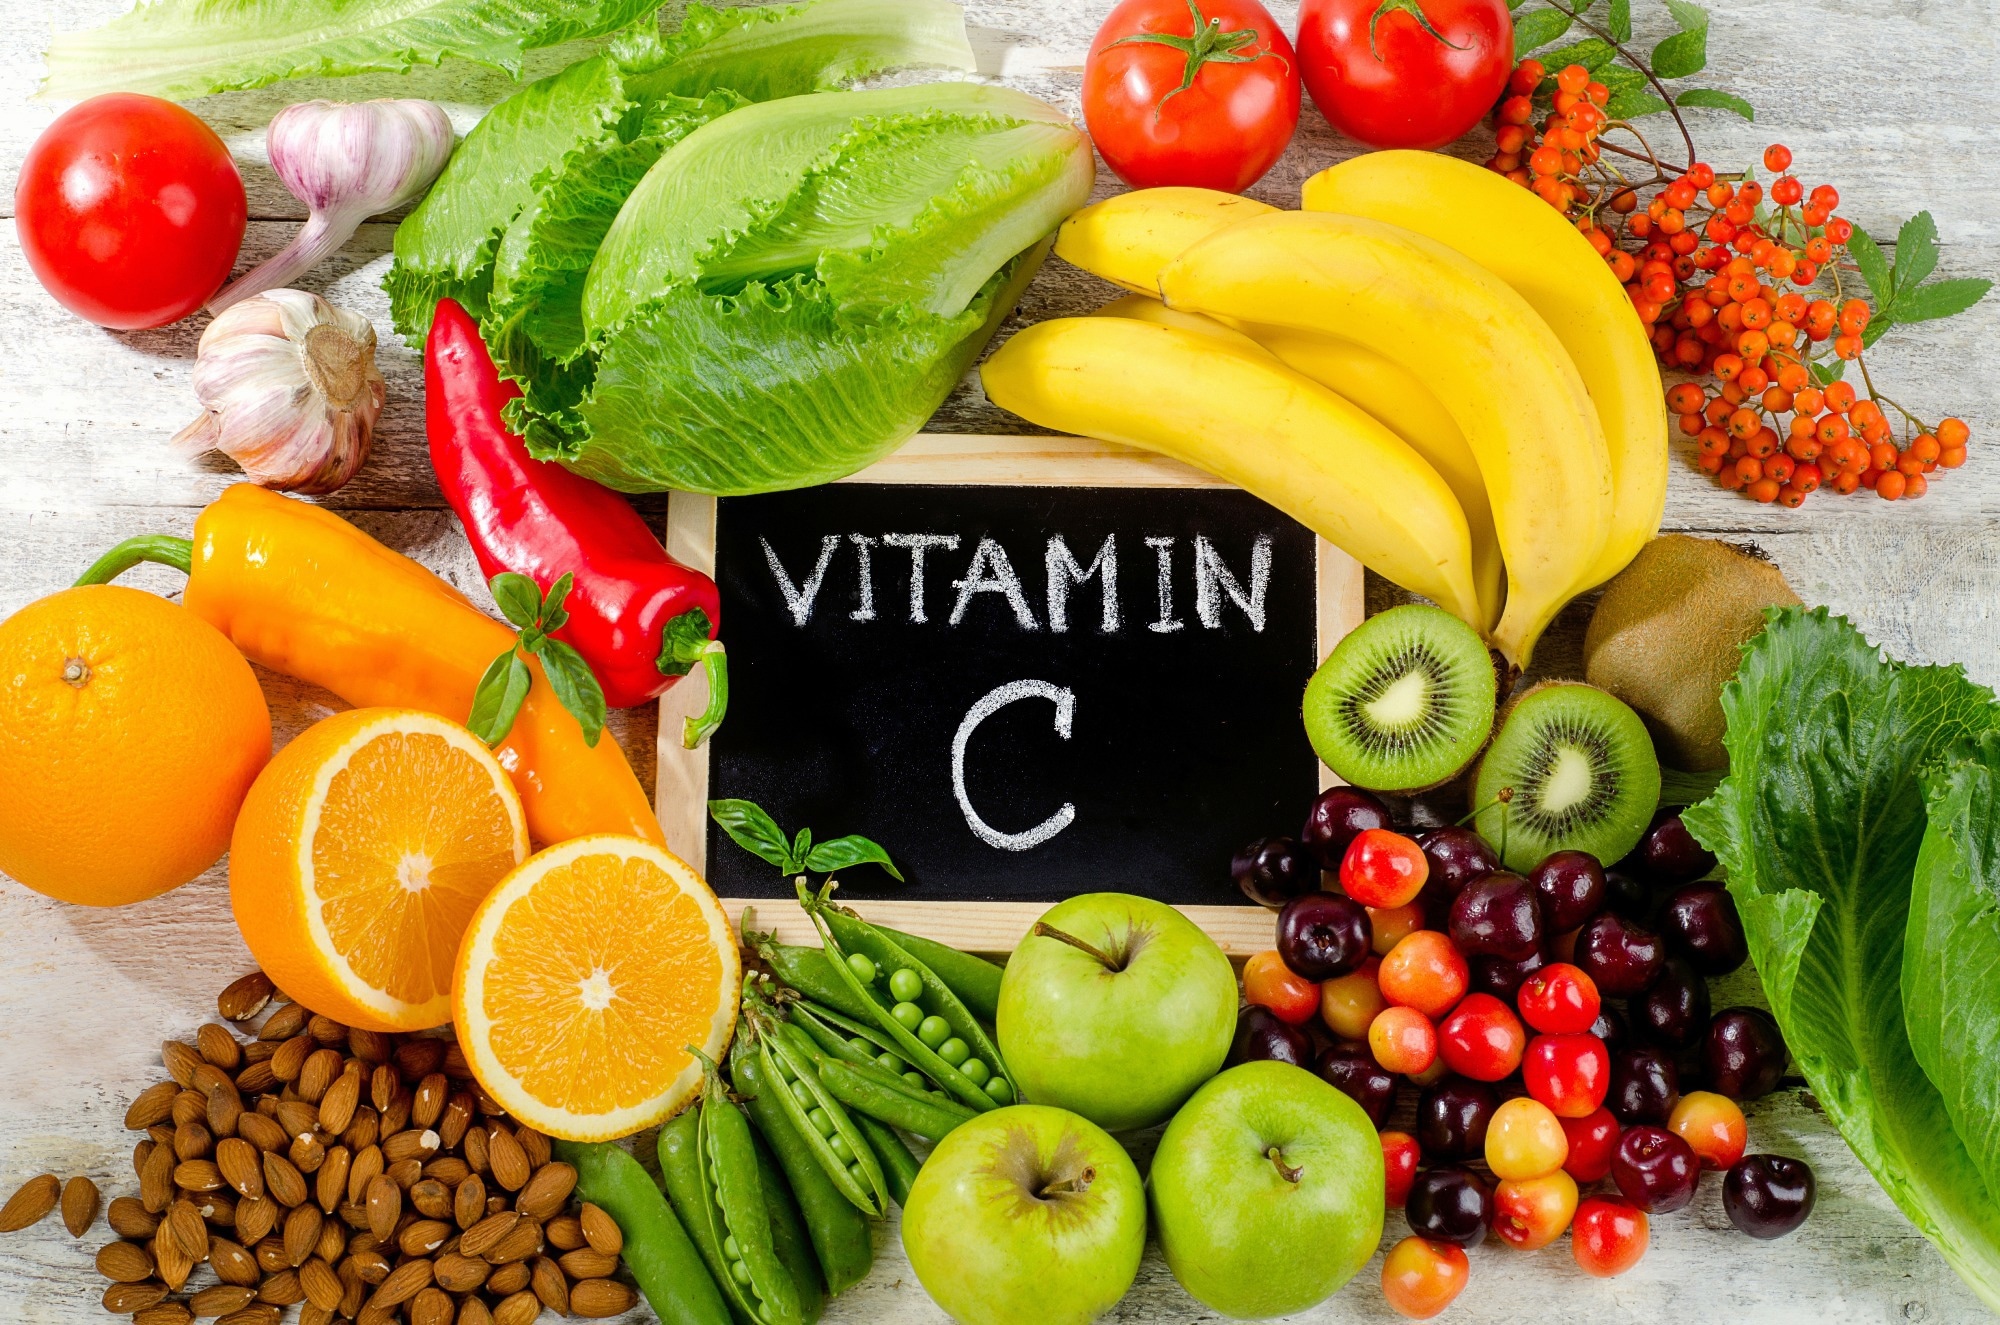 Study: Is vitamin C a booster of the effects of dietary nitrate on endothelial function? Physiologic rationale and implications for research. Image Credit: Tatjana Baibakova/Shutterstock.com